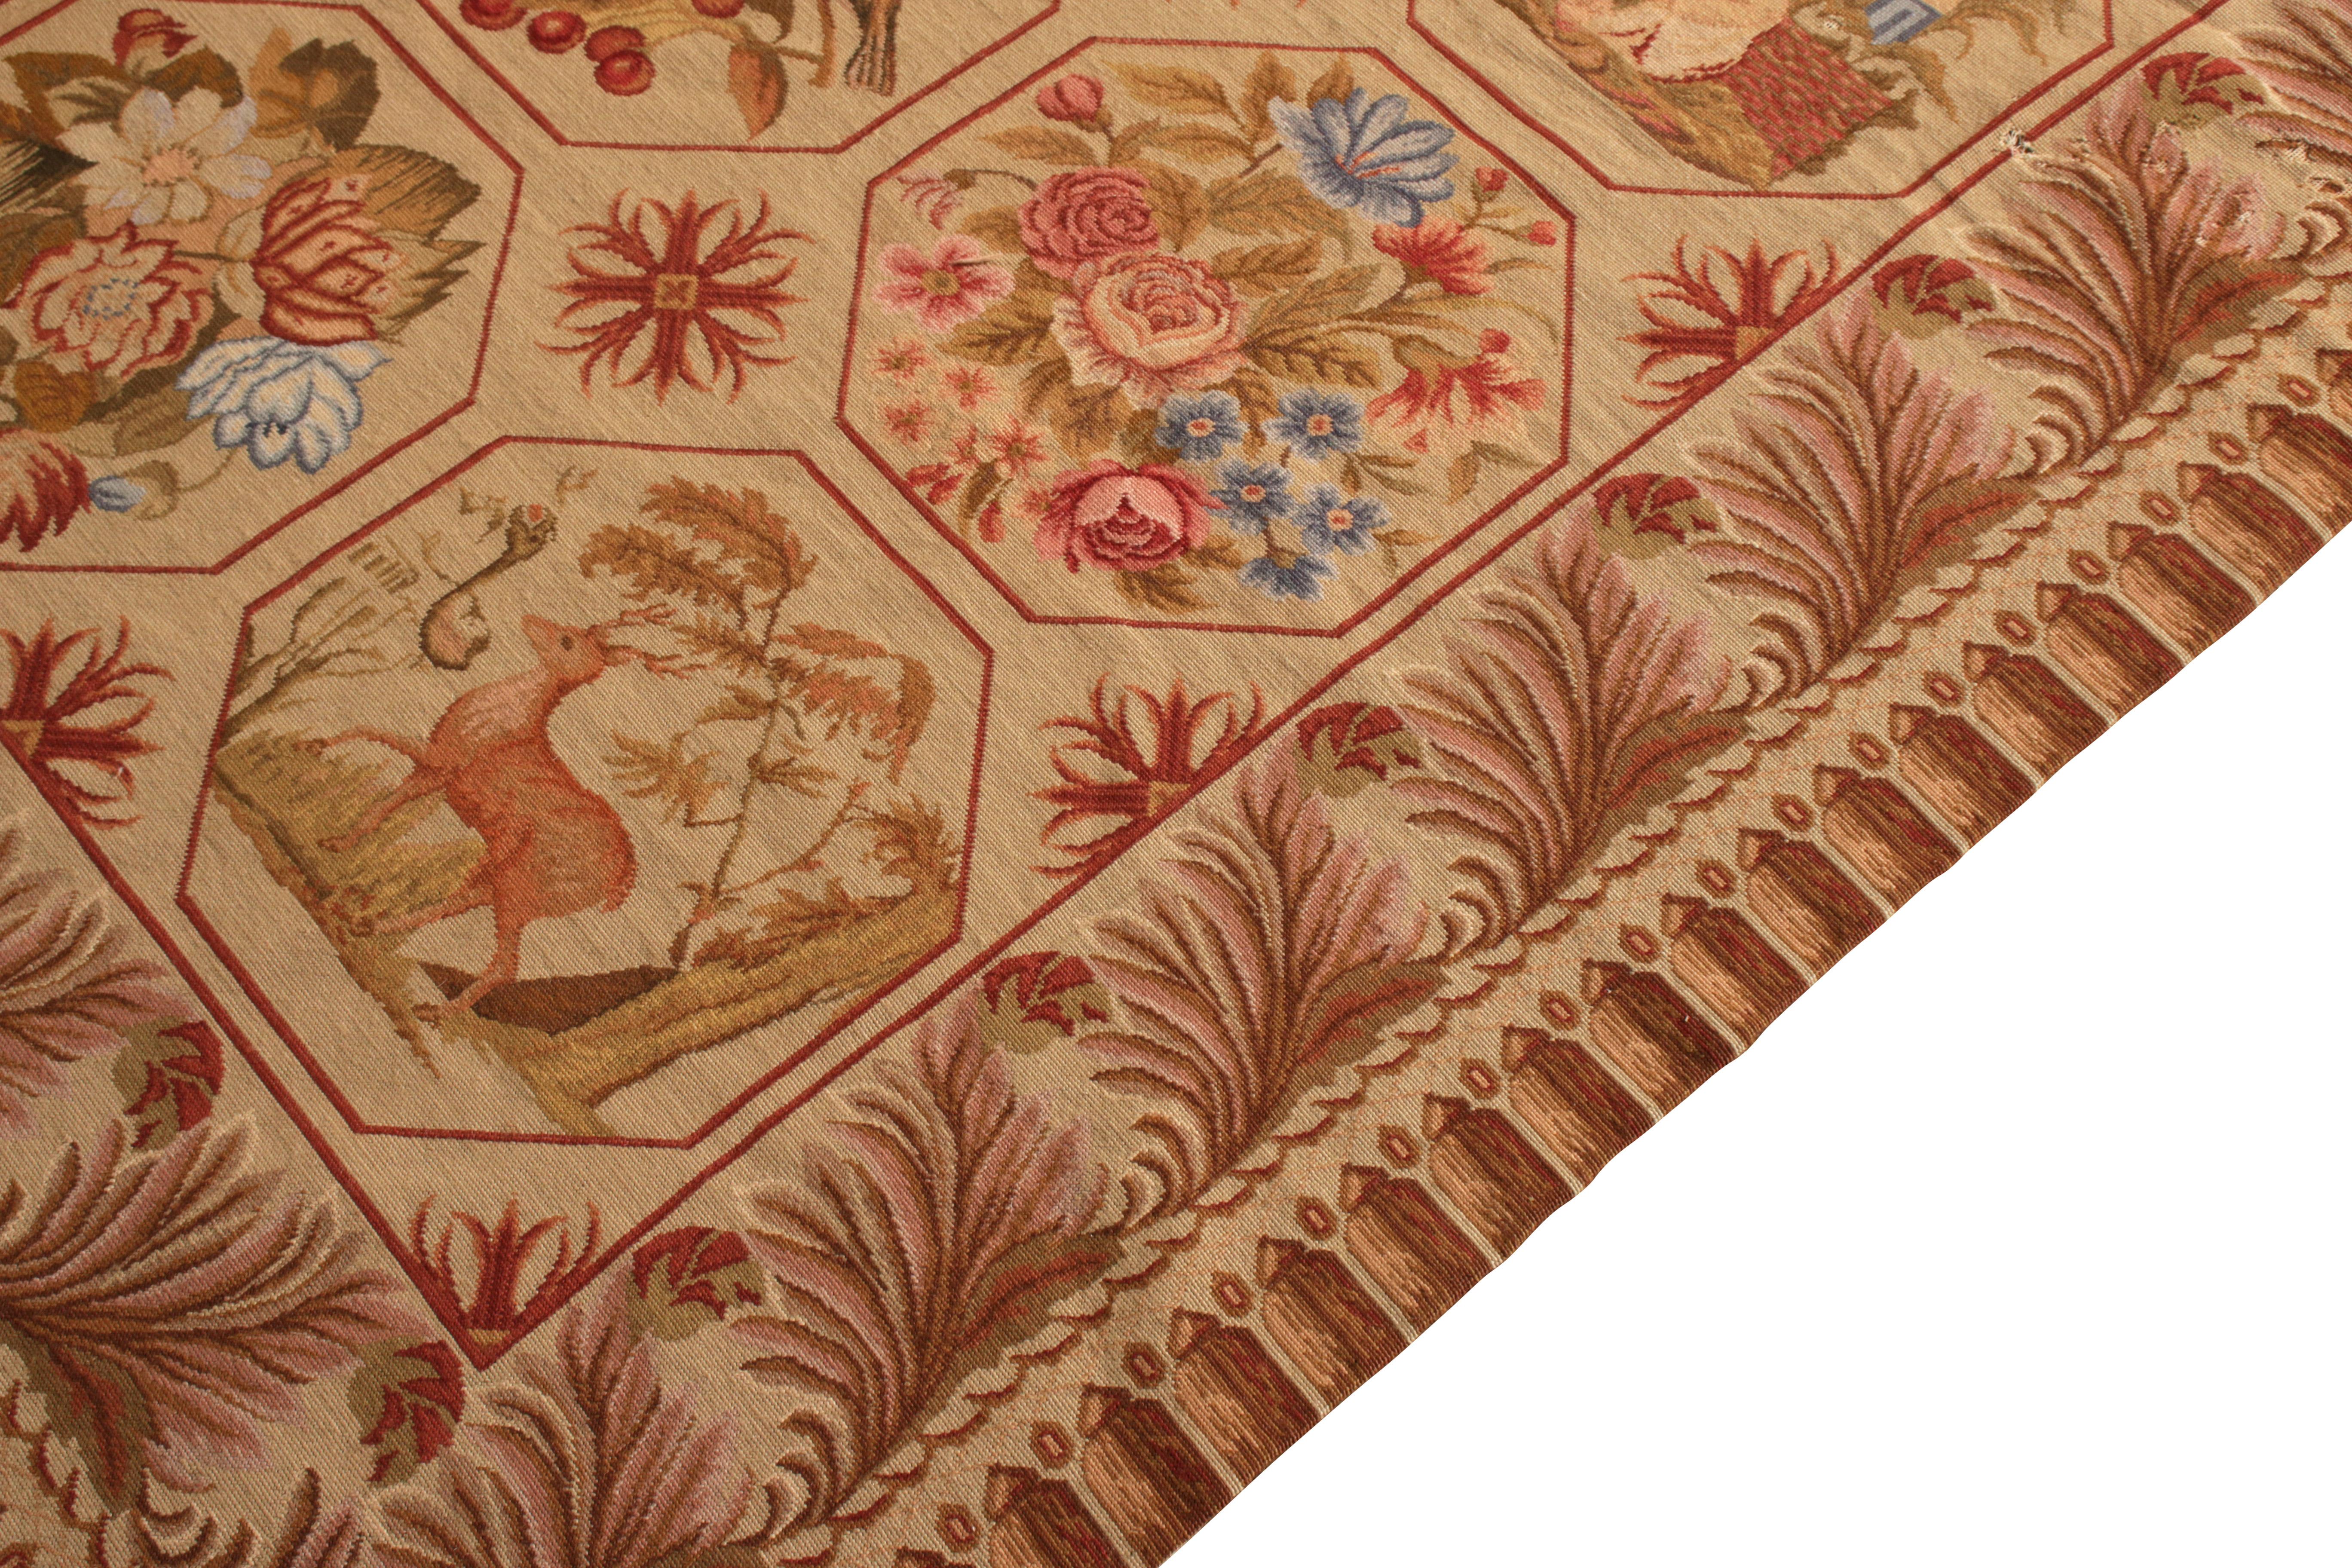 Chinese Antique Needlepoint Rug in Beige-Brown Floral Pictorial Pattern by Rug & Kilim For Sale